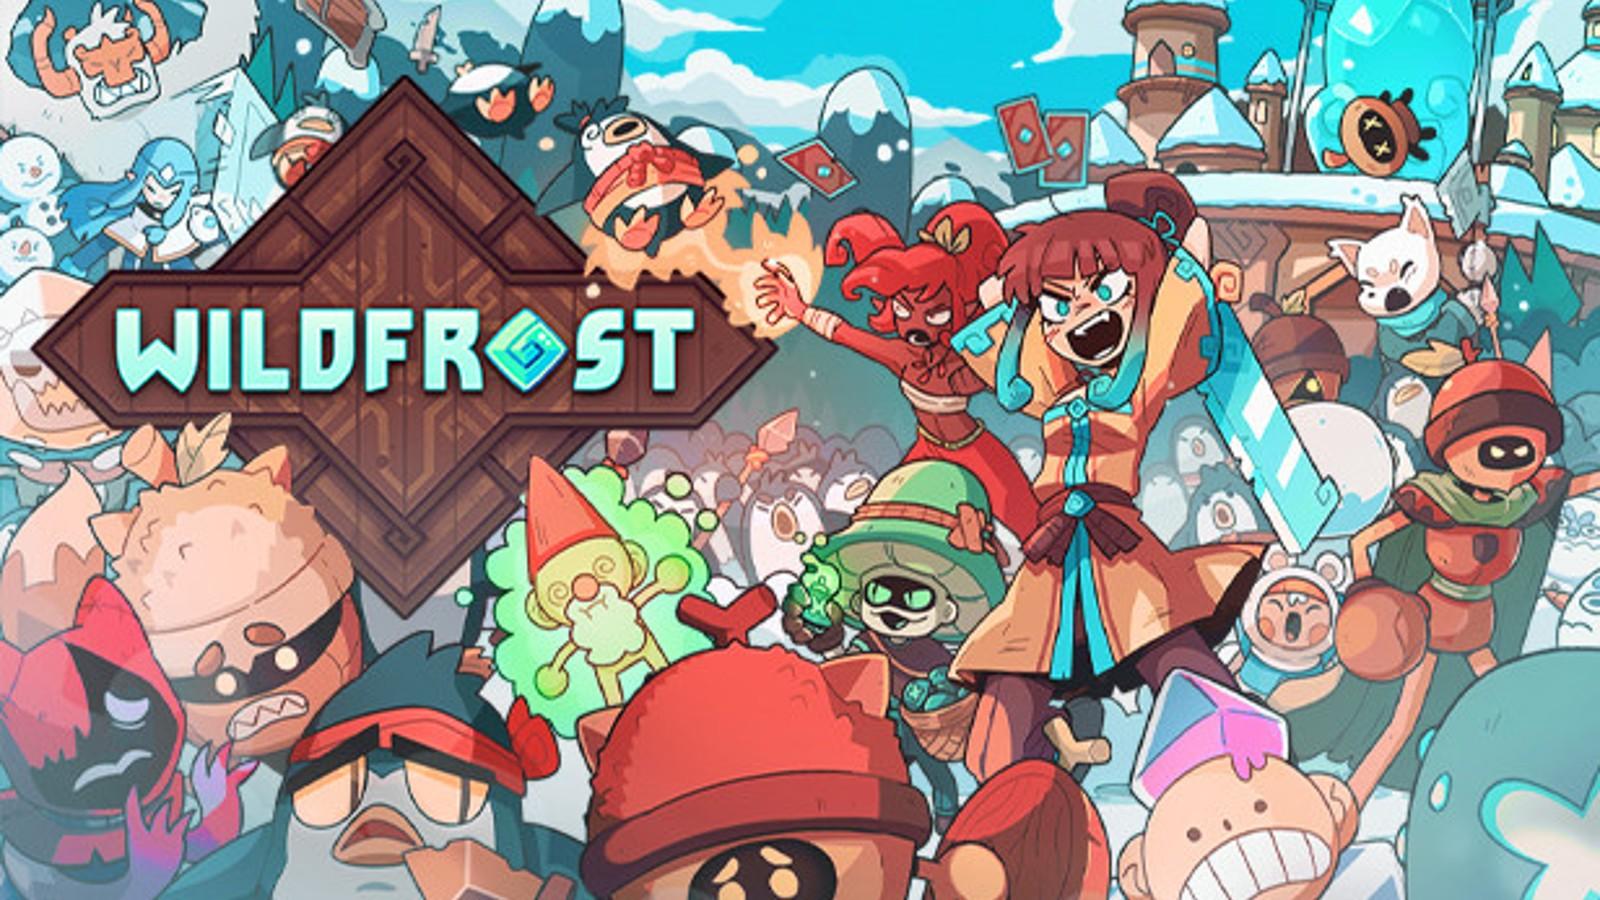 An image of official Wildfrost artwork.